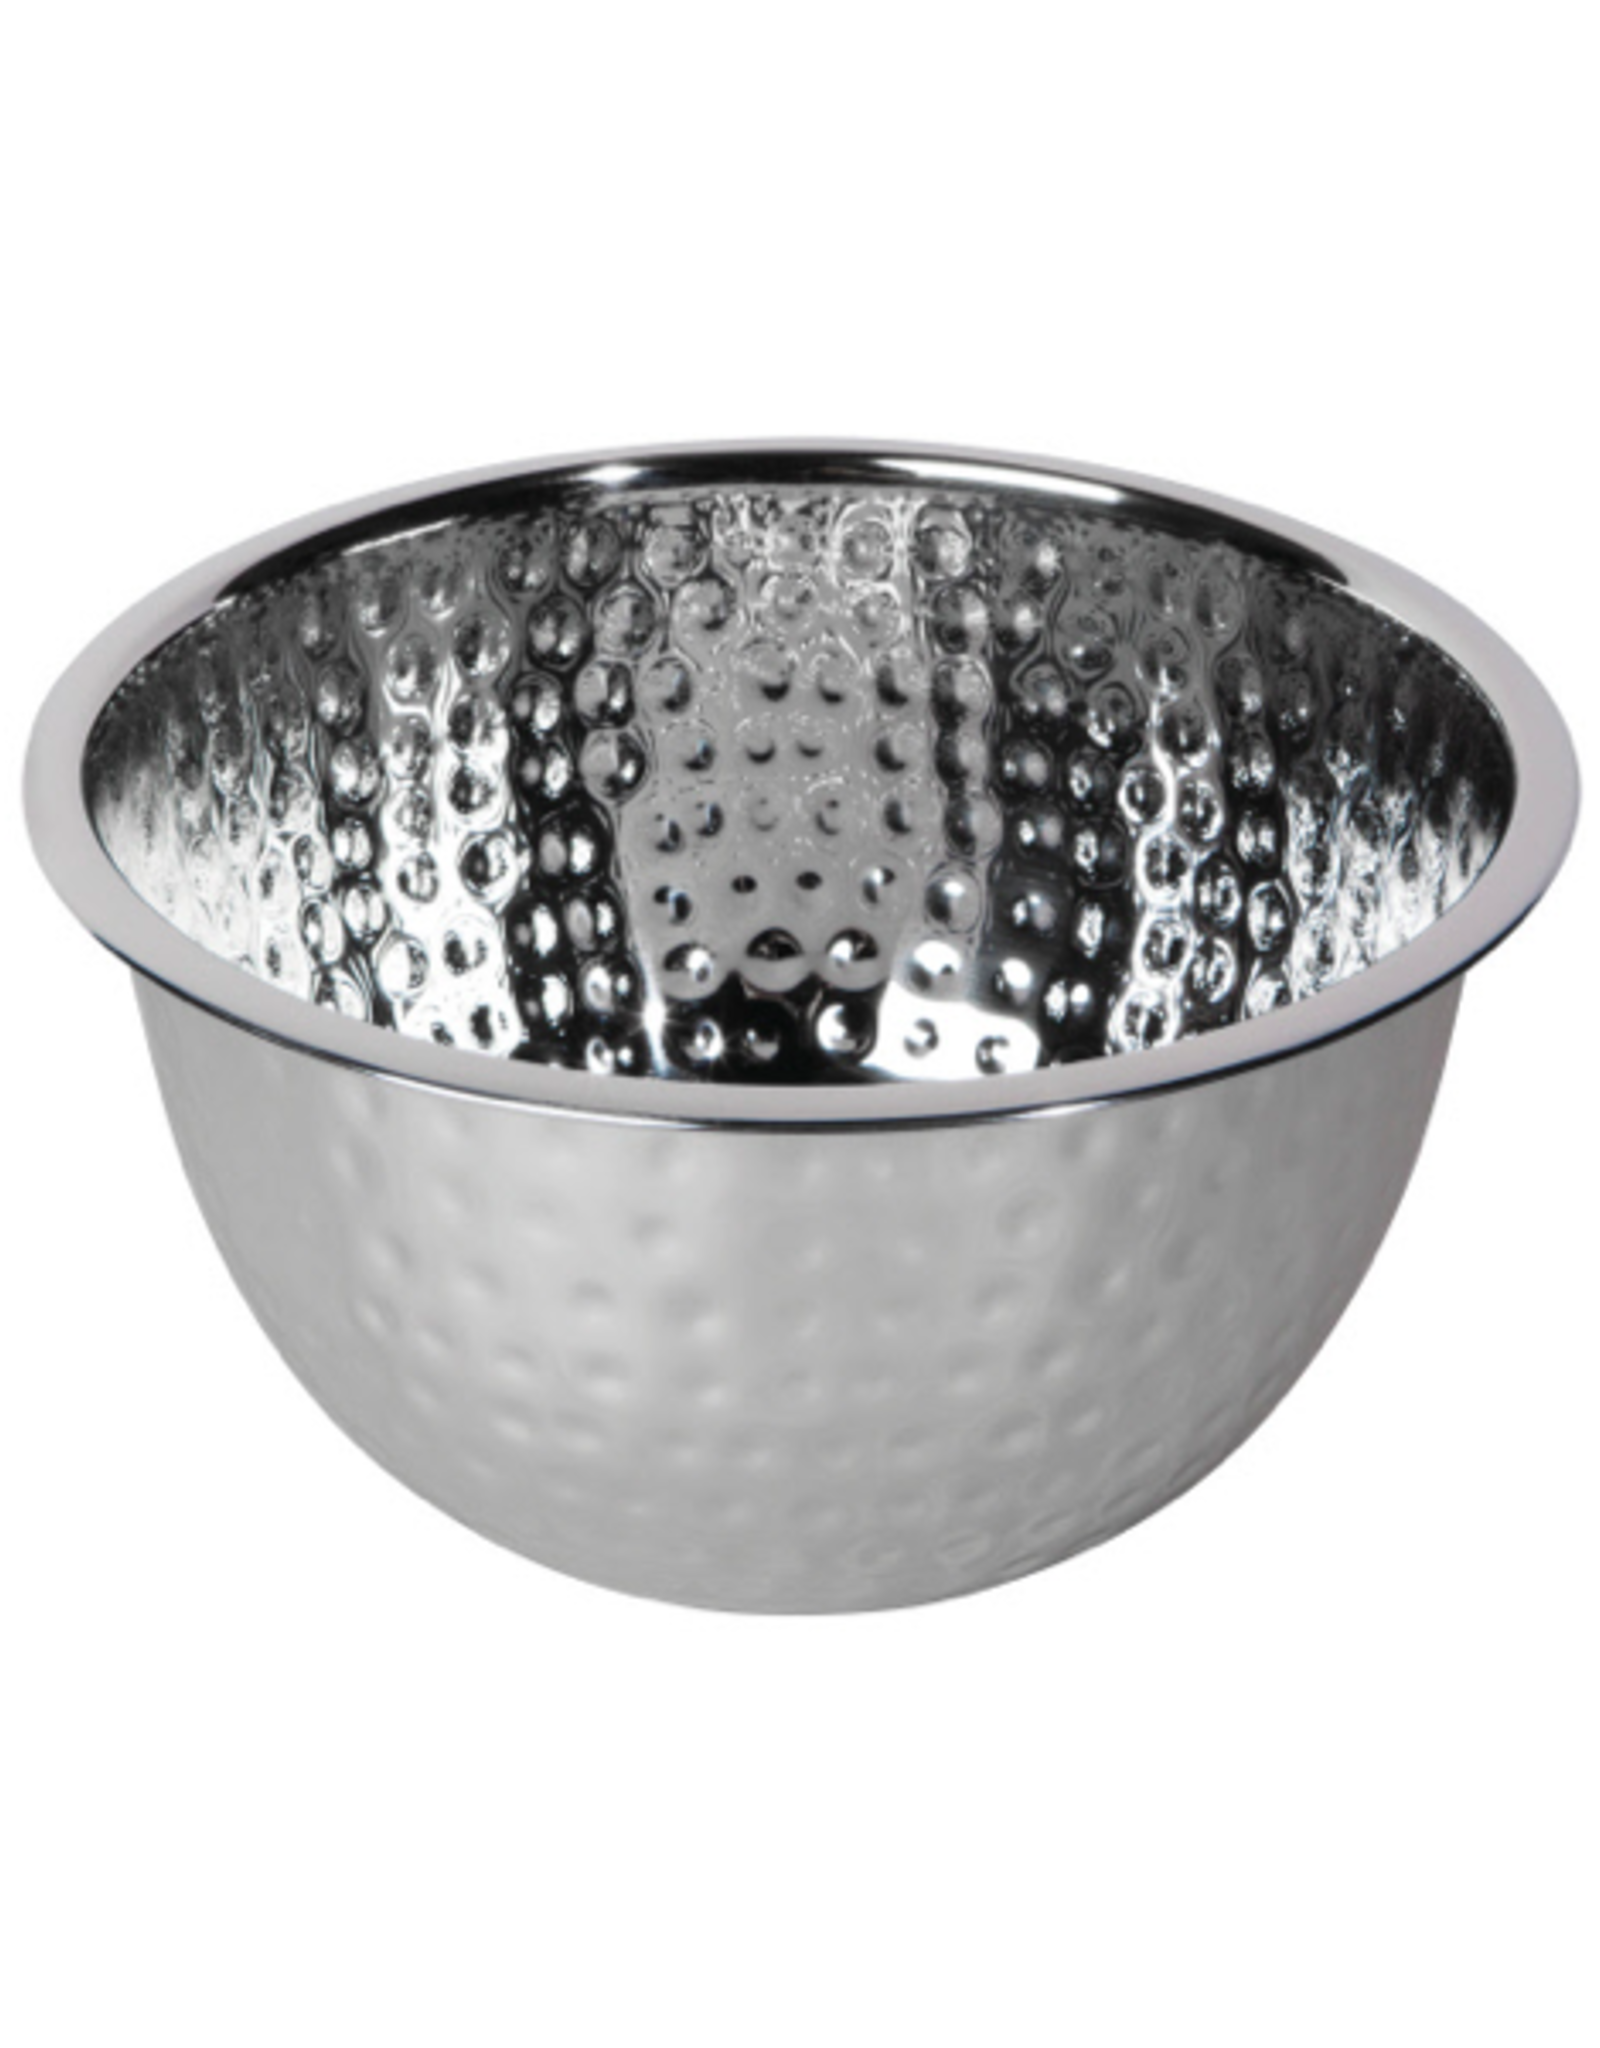 DCA - Mixing Bowl / Hammered Stainless Steel, 9"